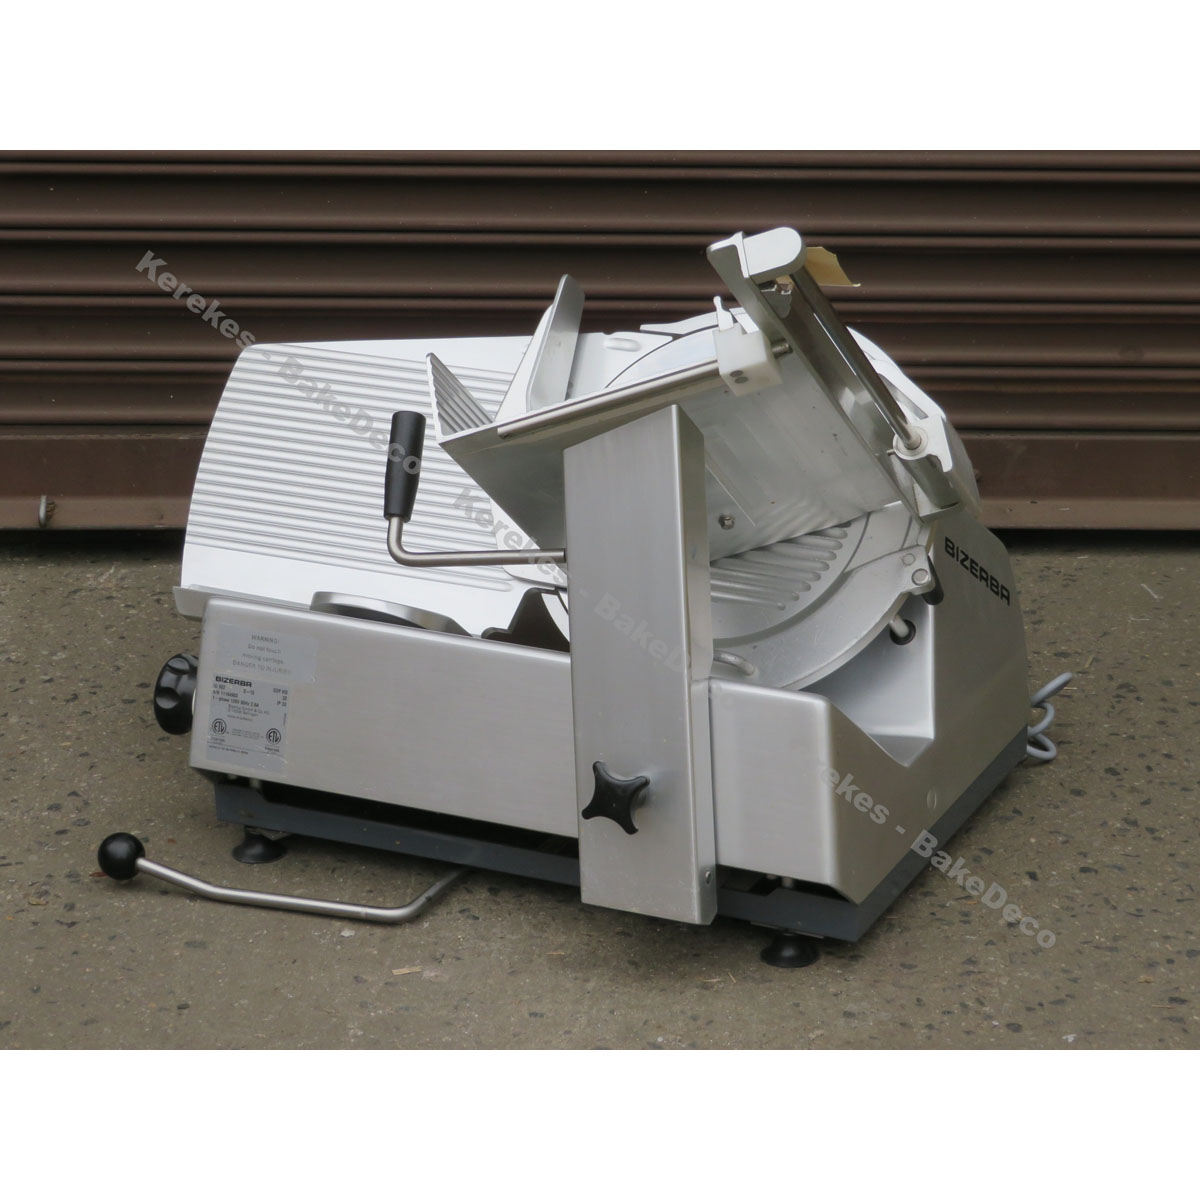 Bizerba Meat Slicer GSP-HD, Used Great Condition image 3